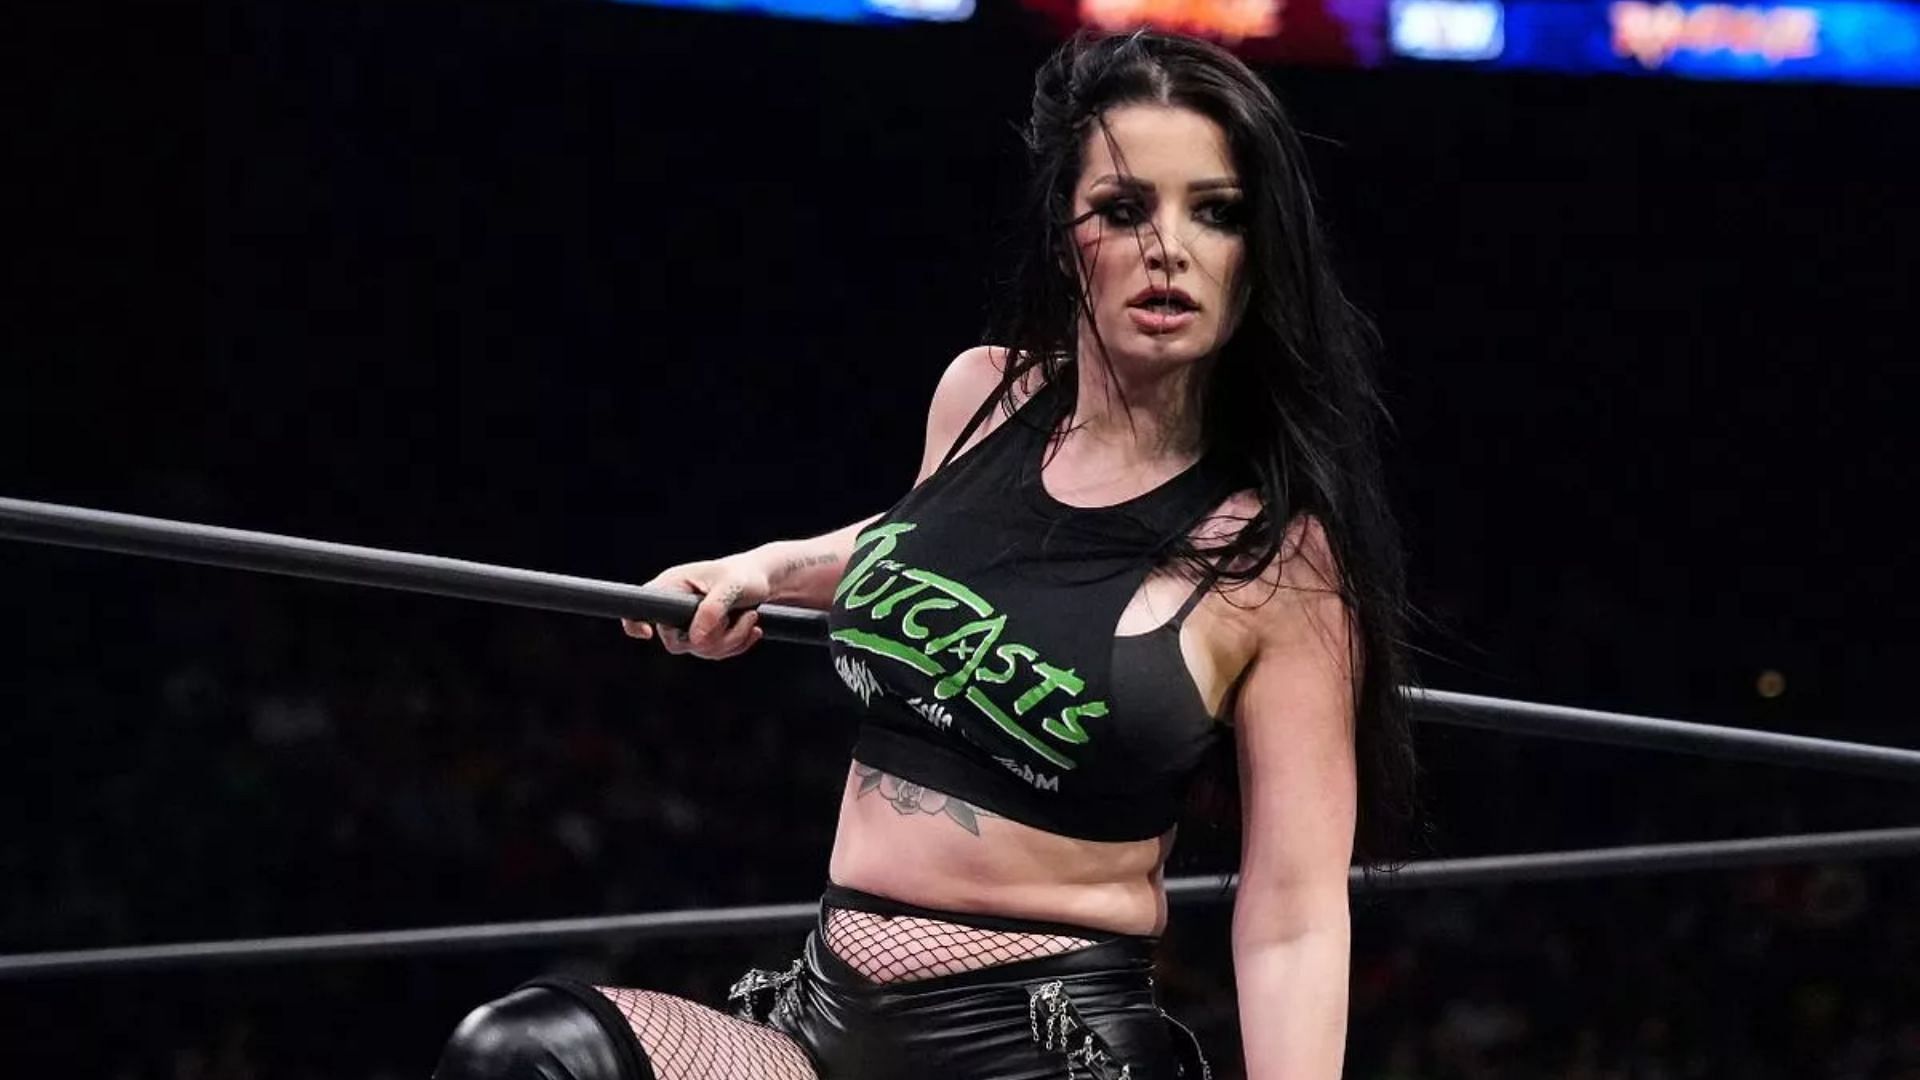 What went on between Saraya and this AEW star?